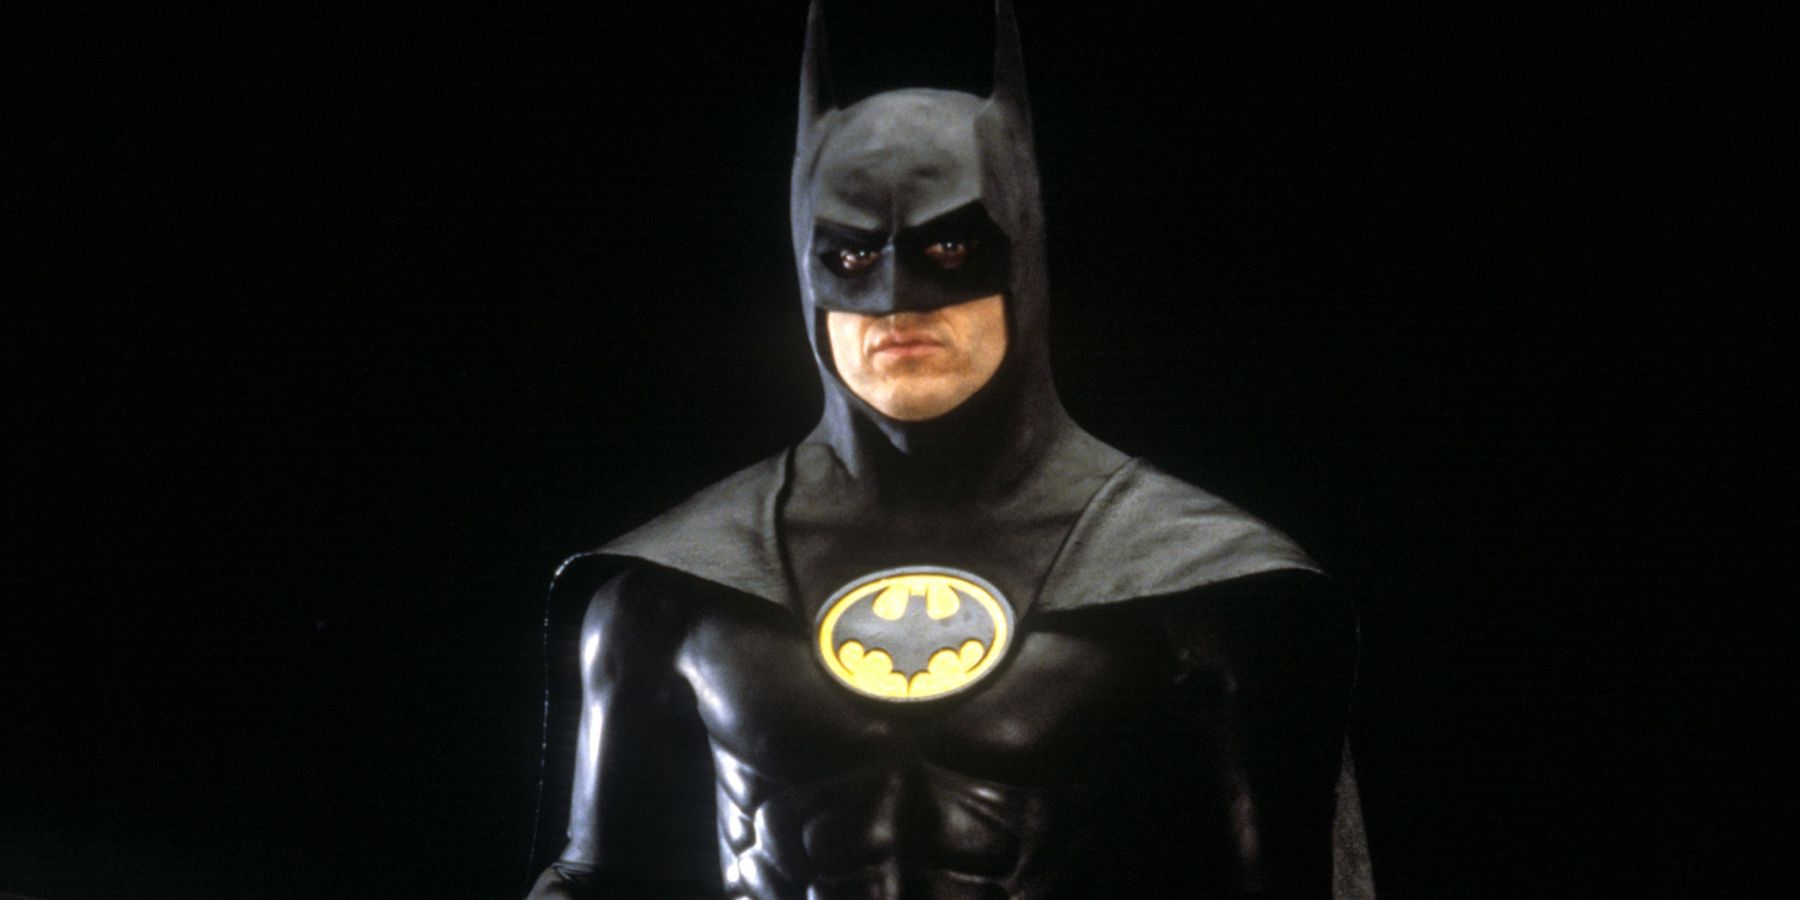 Batman 1989 opted not to go Spandex